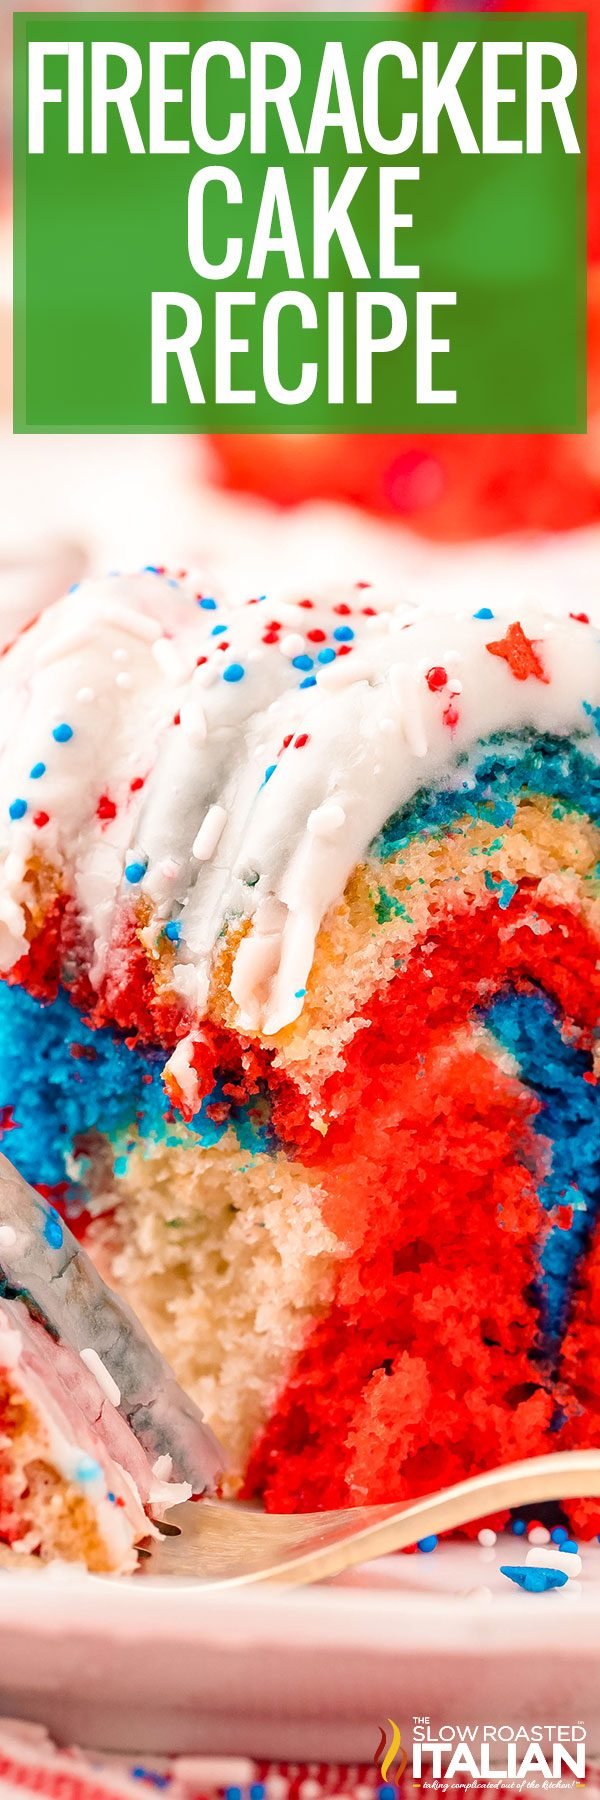 titled image (and shown): Firecracker Cake